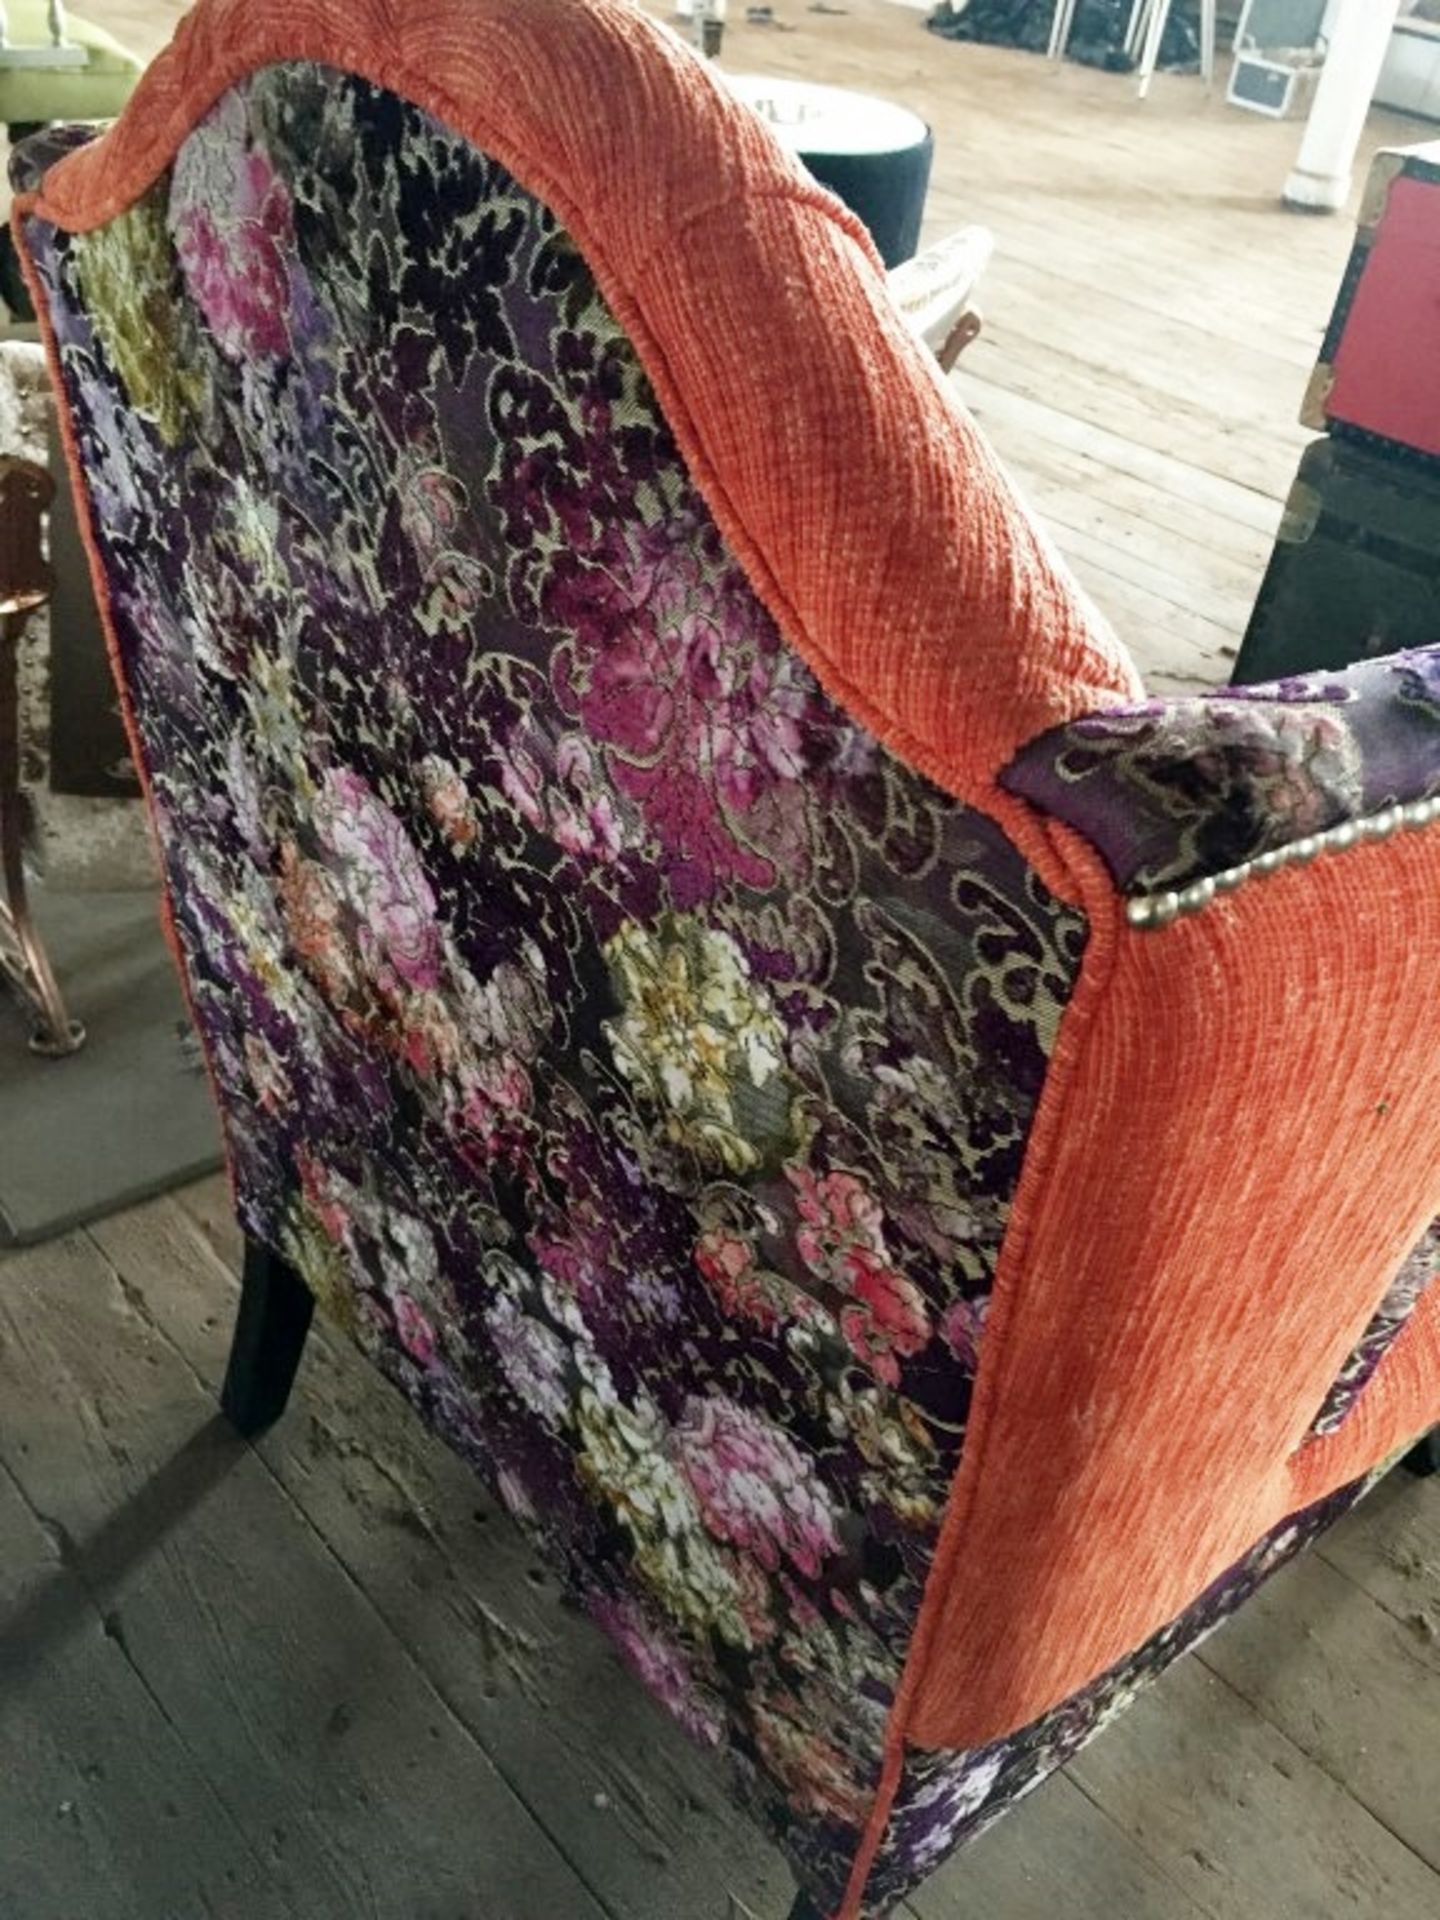 1 x Bespoke Handcrafted Wingback Chair In Upholstered In Luxury Orange & Floral Fabrics - - Image 7 of 7